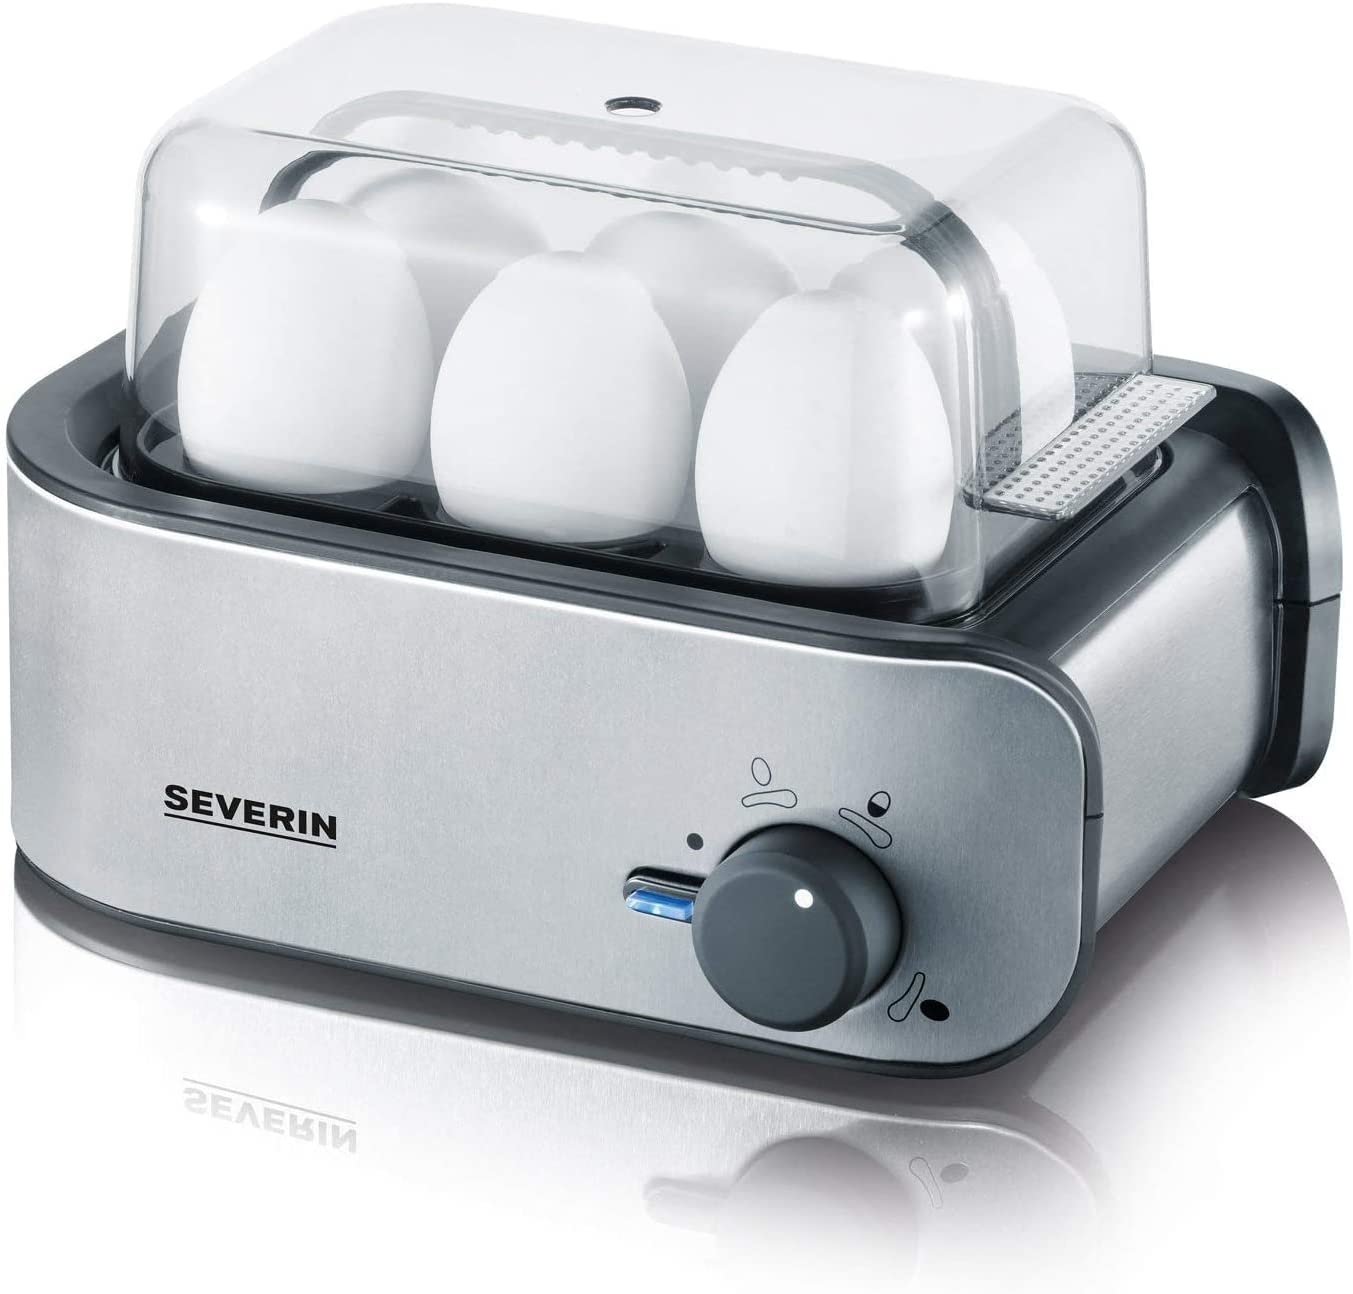 SEVERIN Egg Boiler for 6 Eggs with Electronic Cooking Time Monitoring, Includes Measuring Cup with Egg Picker, Egg Cooker with Poacher Insert, Brushed Stainless Steel / Black, 420 W, EK 3167